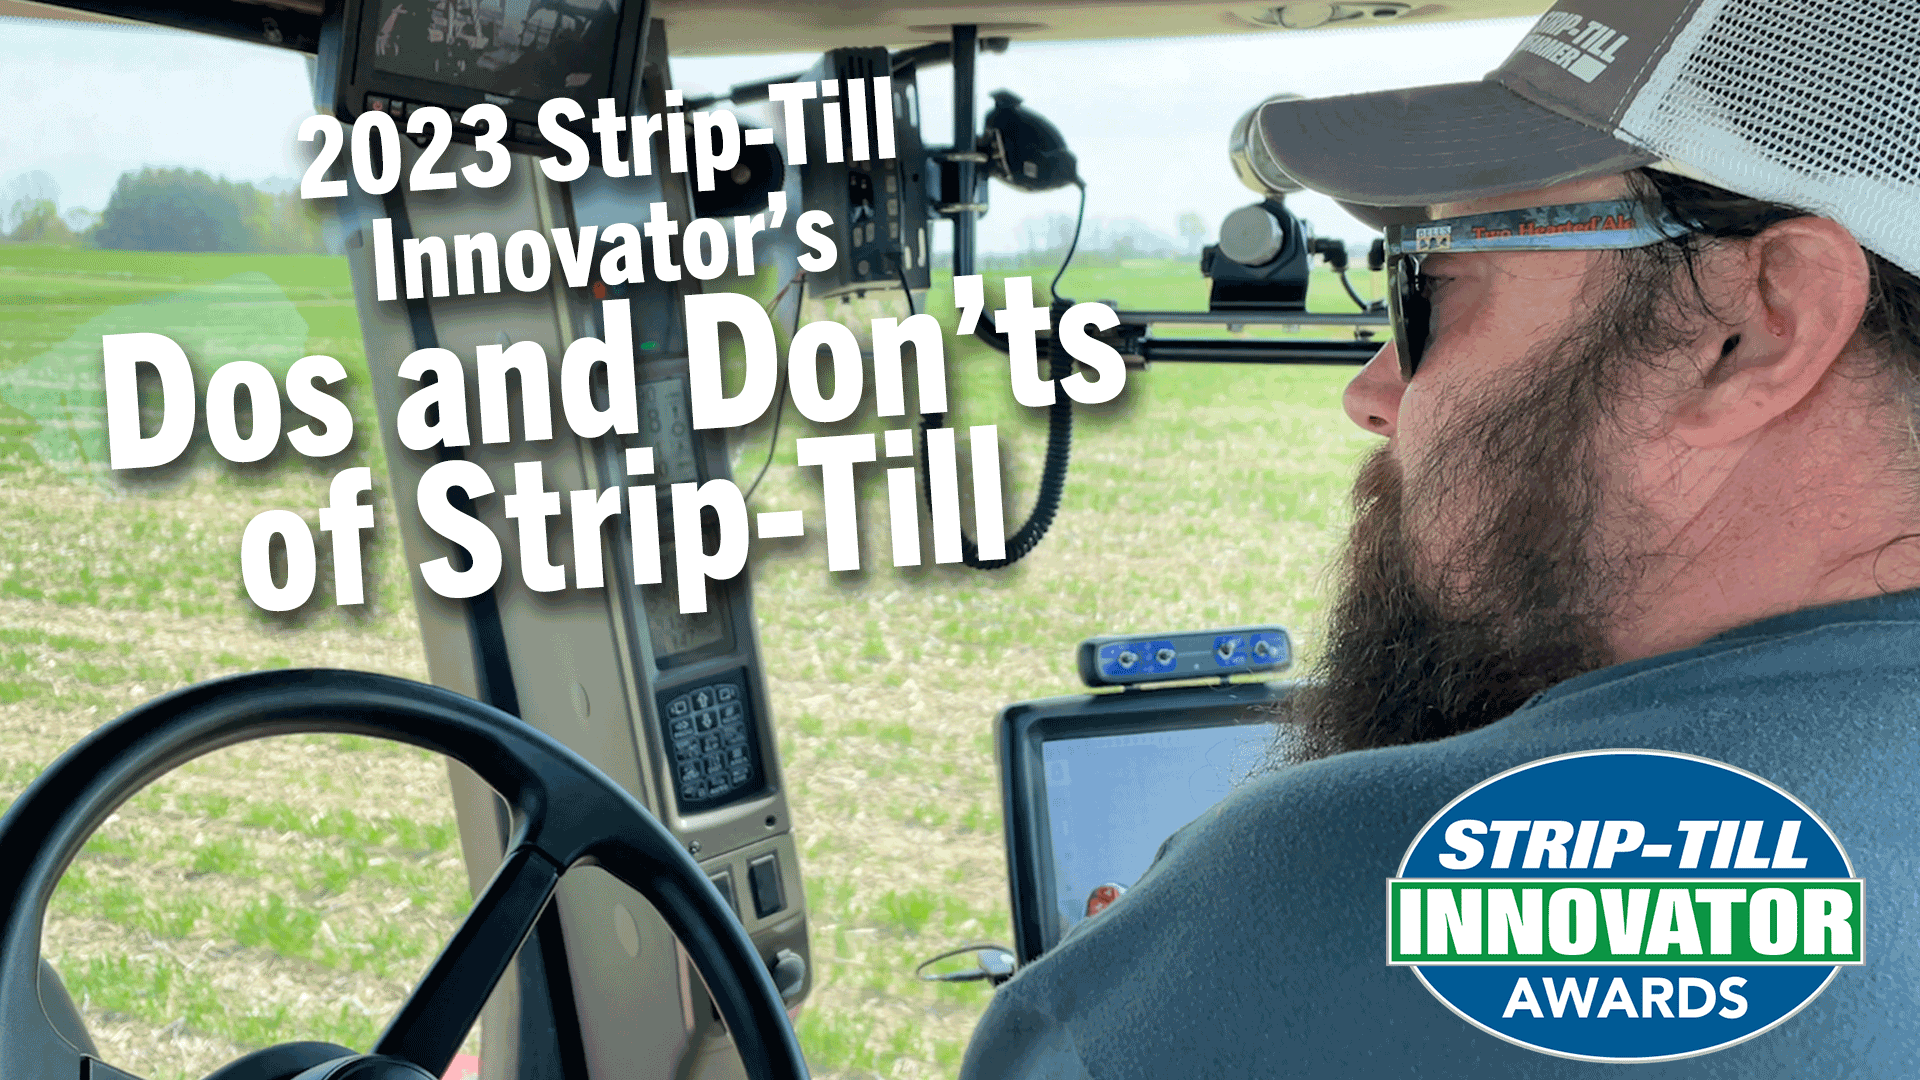 2023-Strip-Till-Innovator’s-Dos-and-Don’ts-of-Strip-Till.png